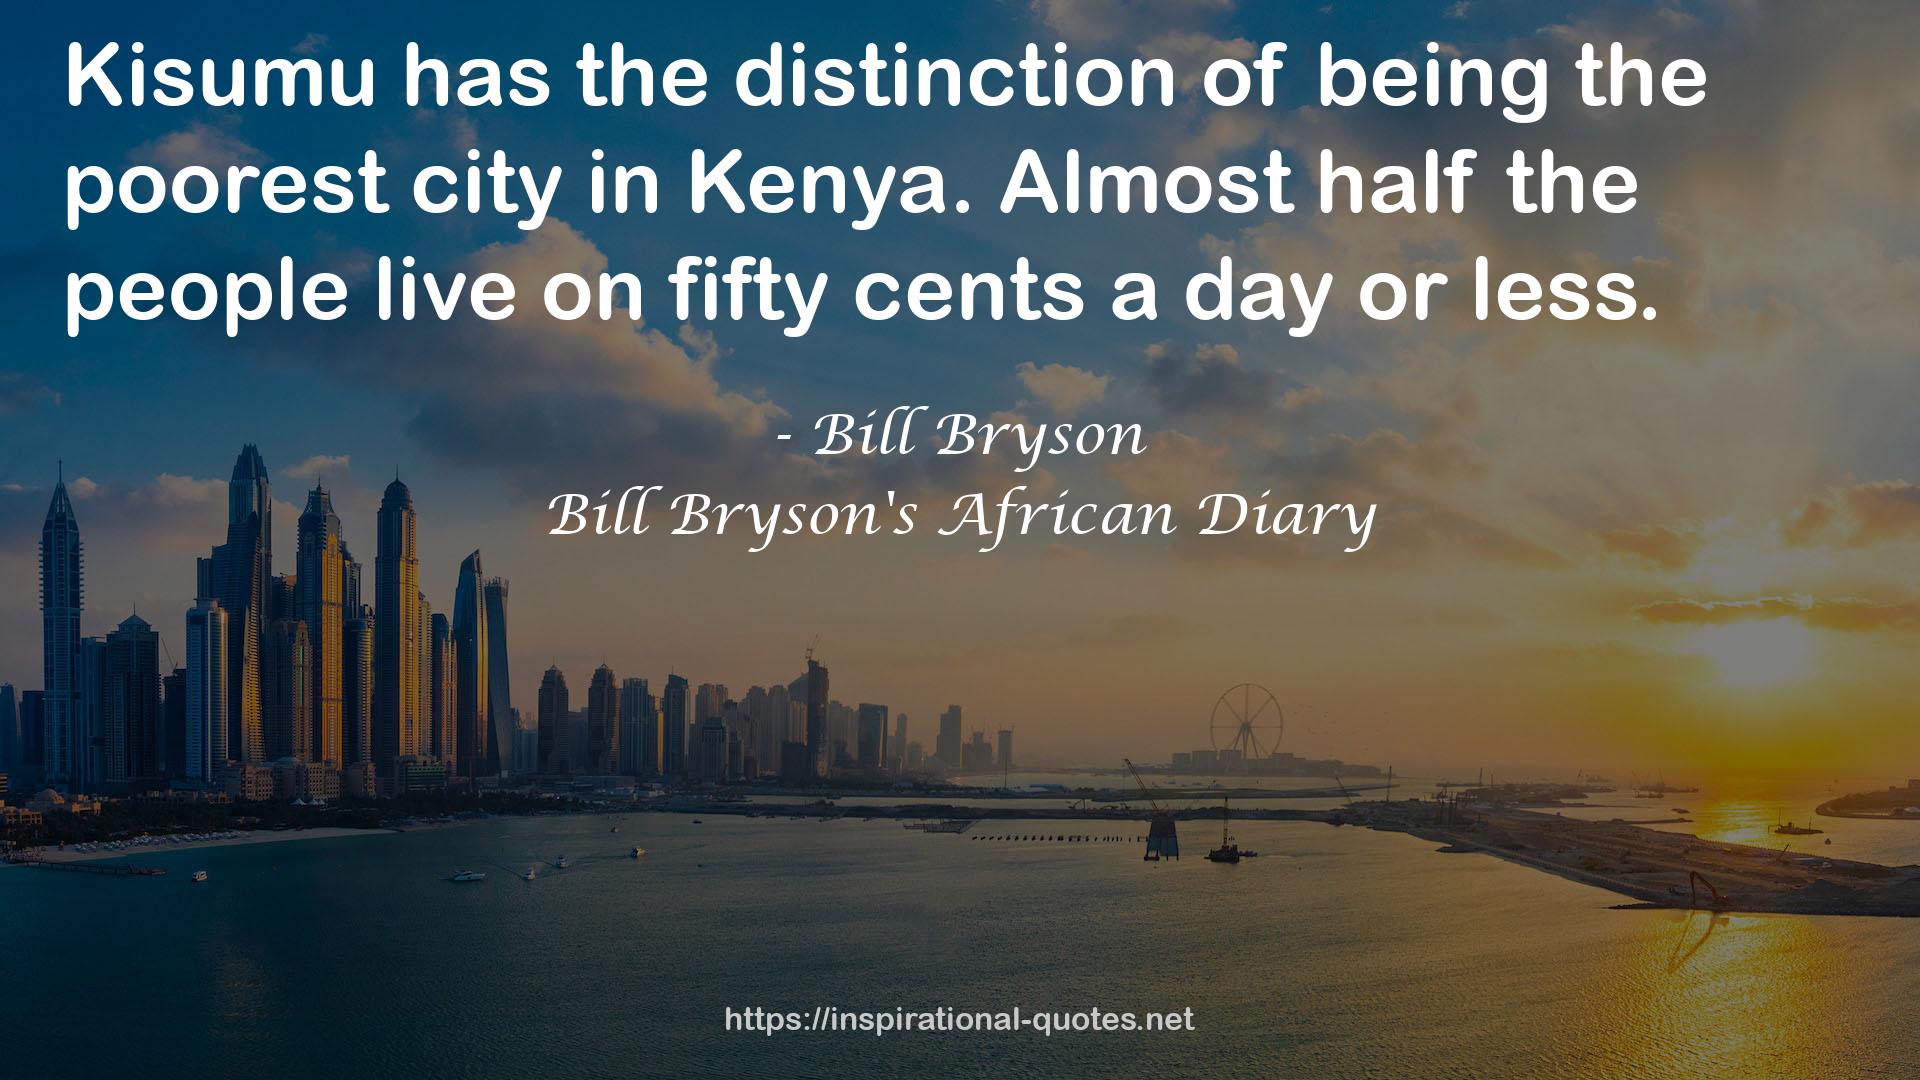 Bill Bryson's African Diary QUOTES